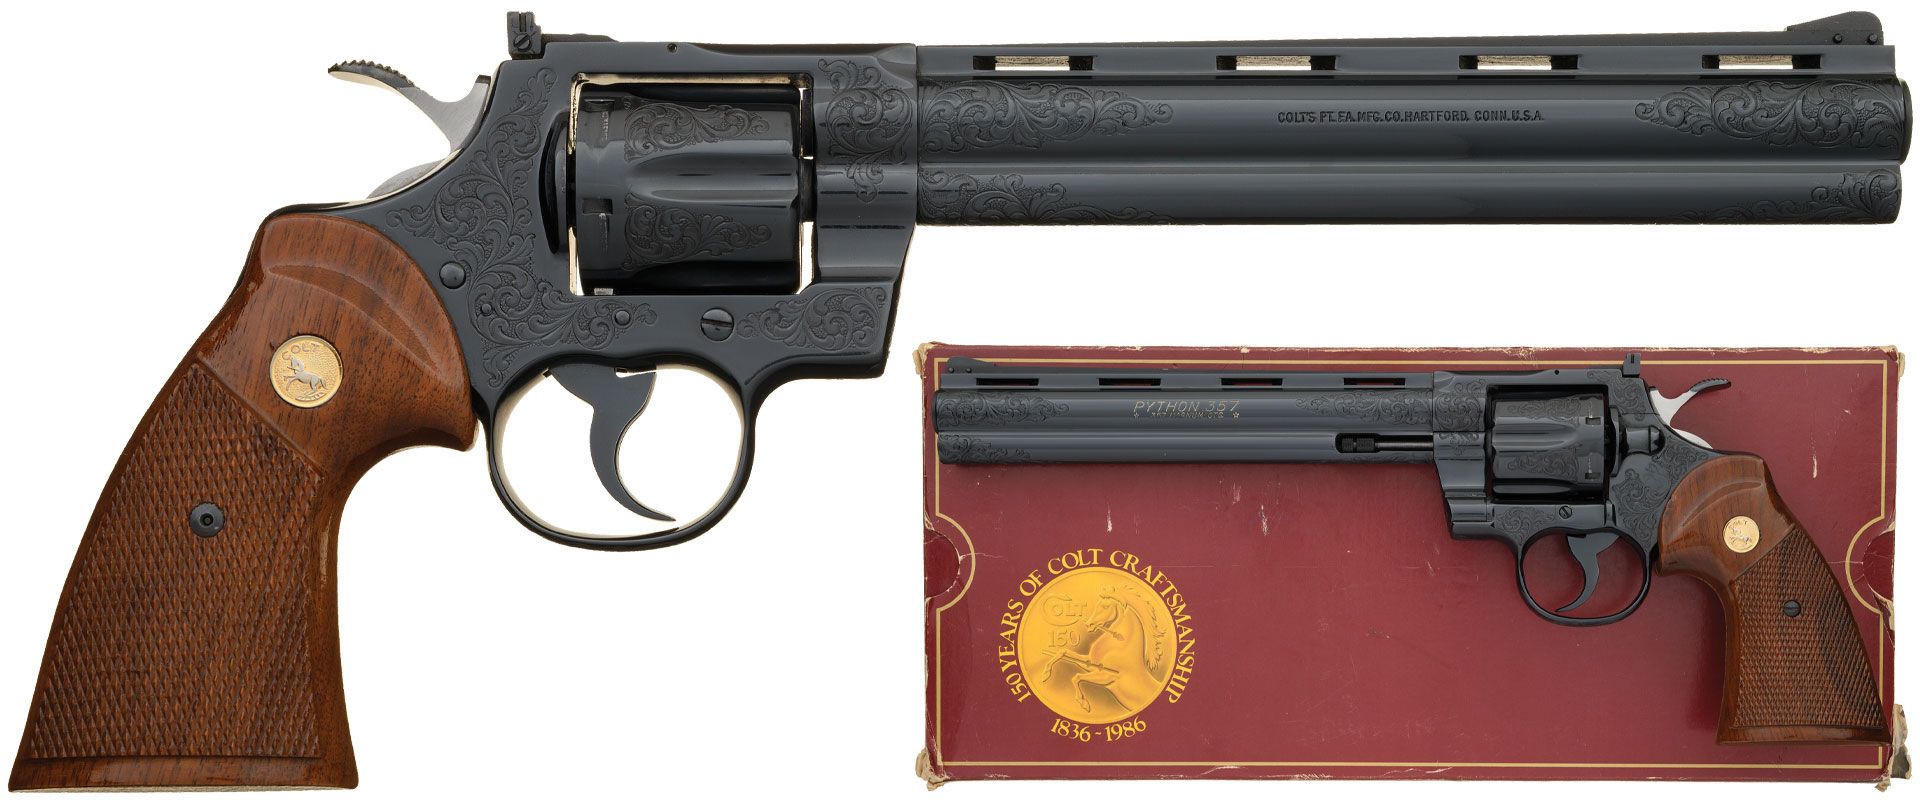 Lot 644: Factory Engraved Colt Python Double Action Revolver with Box